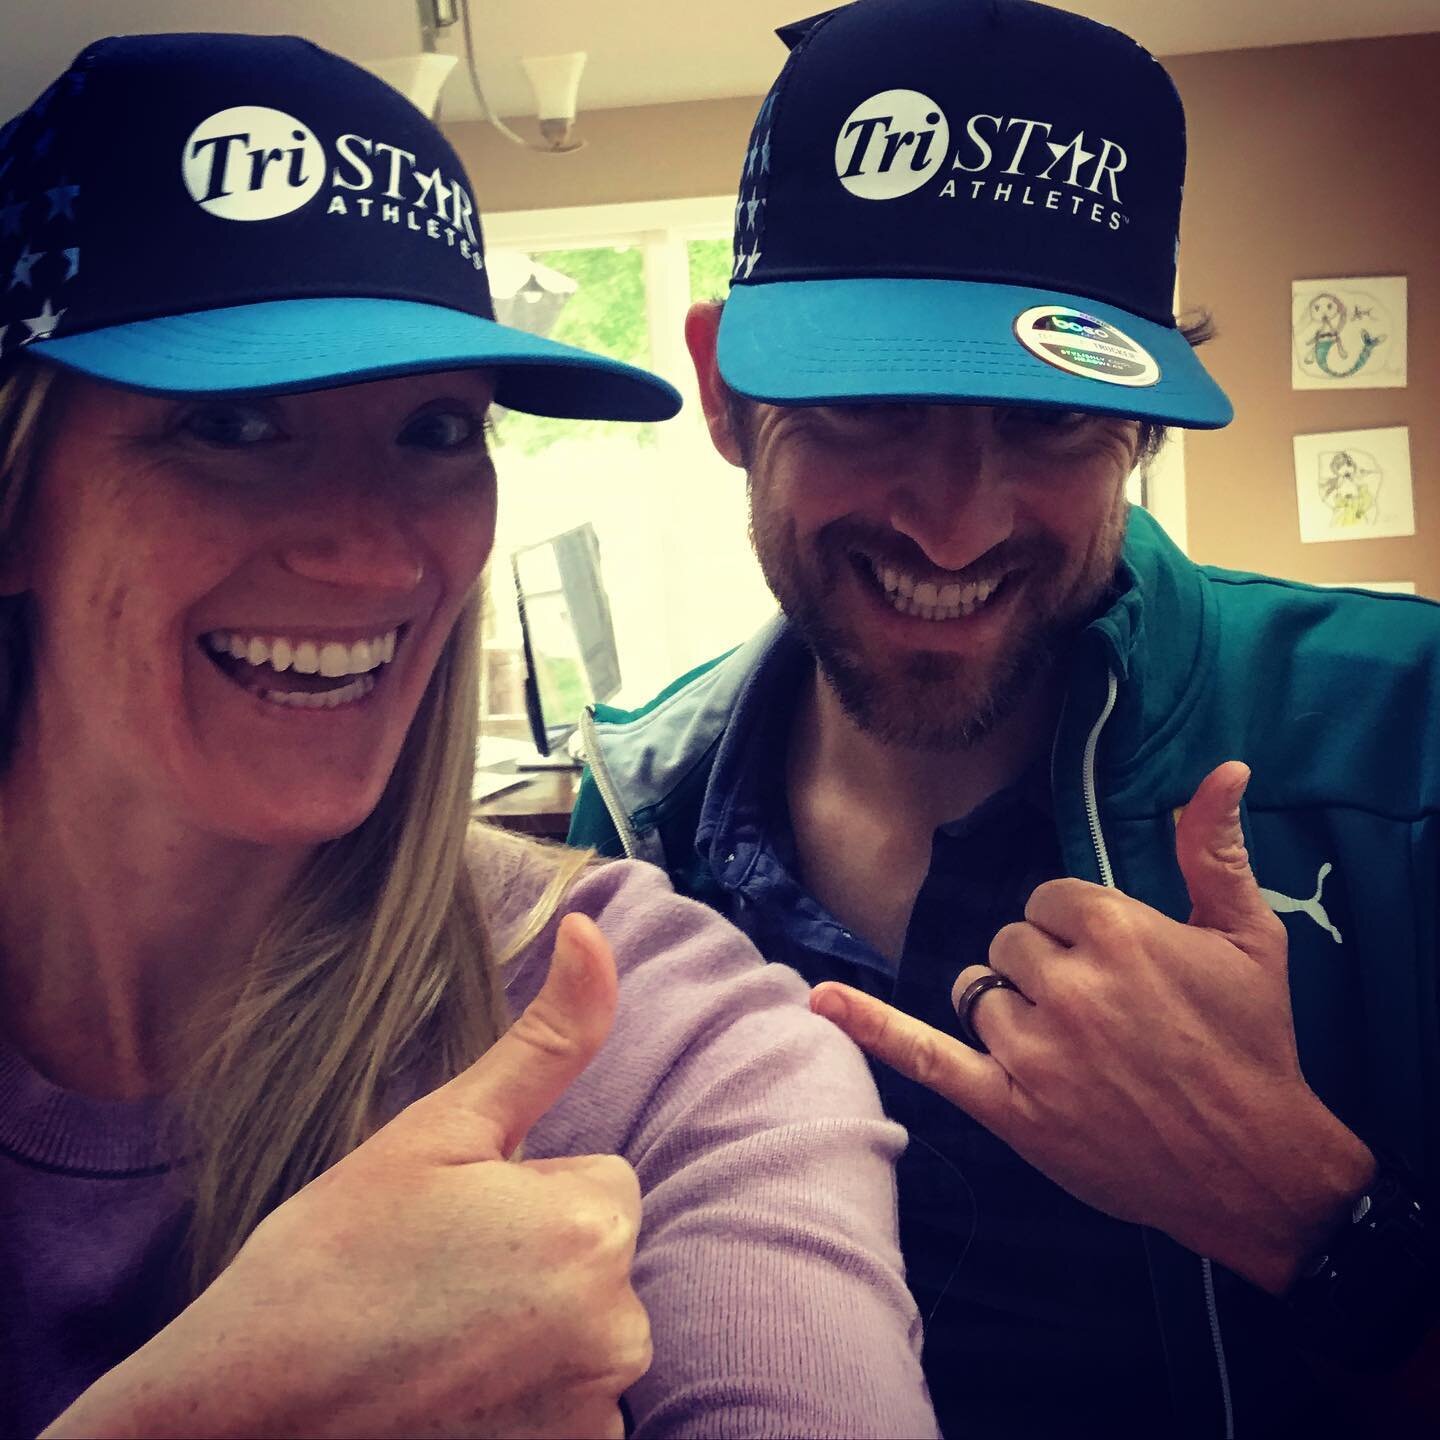 Tristar Athletes Northeast- Jim and Colleen Bartling are ready to crack open 13.1 miles this weekend at the Tristar half. Good luck to all of the Tristar global team racing this weekend hunting for their personal best. #tristarathletes #halfmarathon 